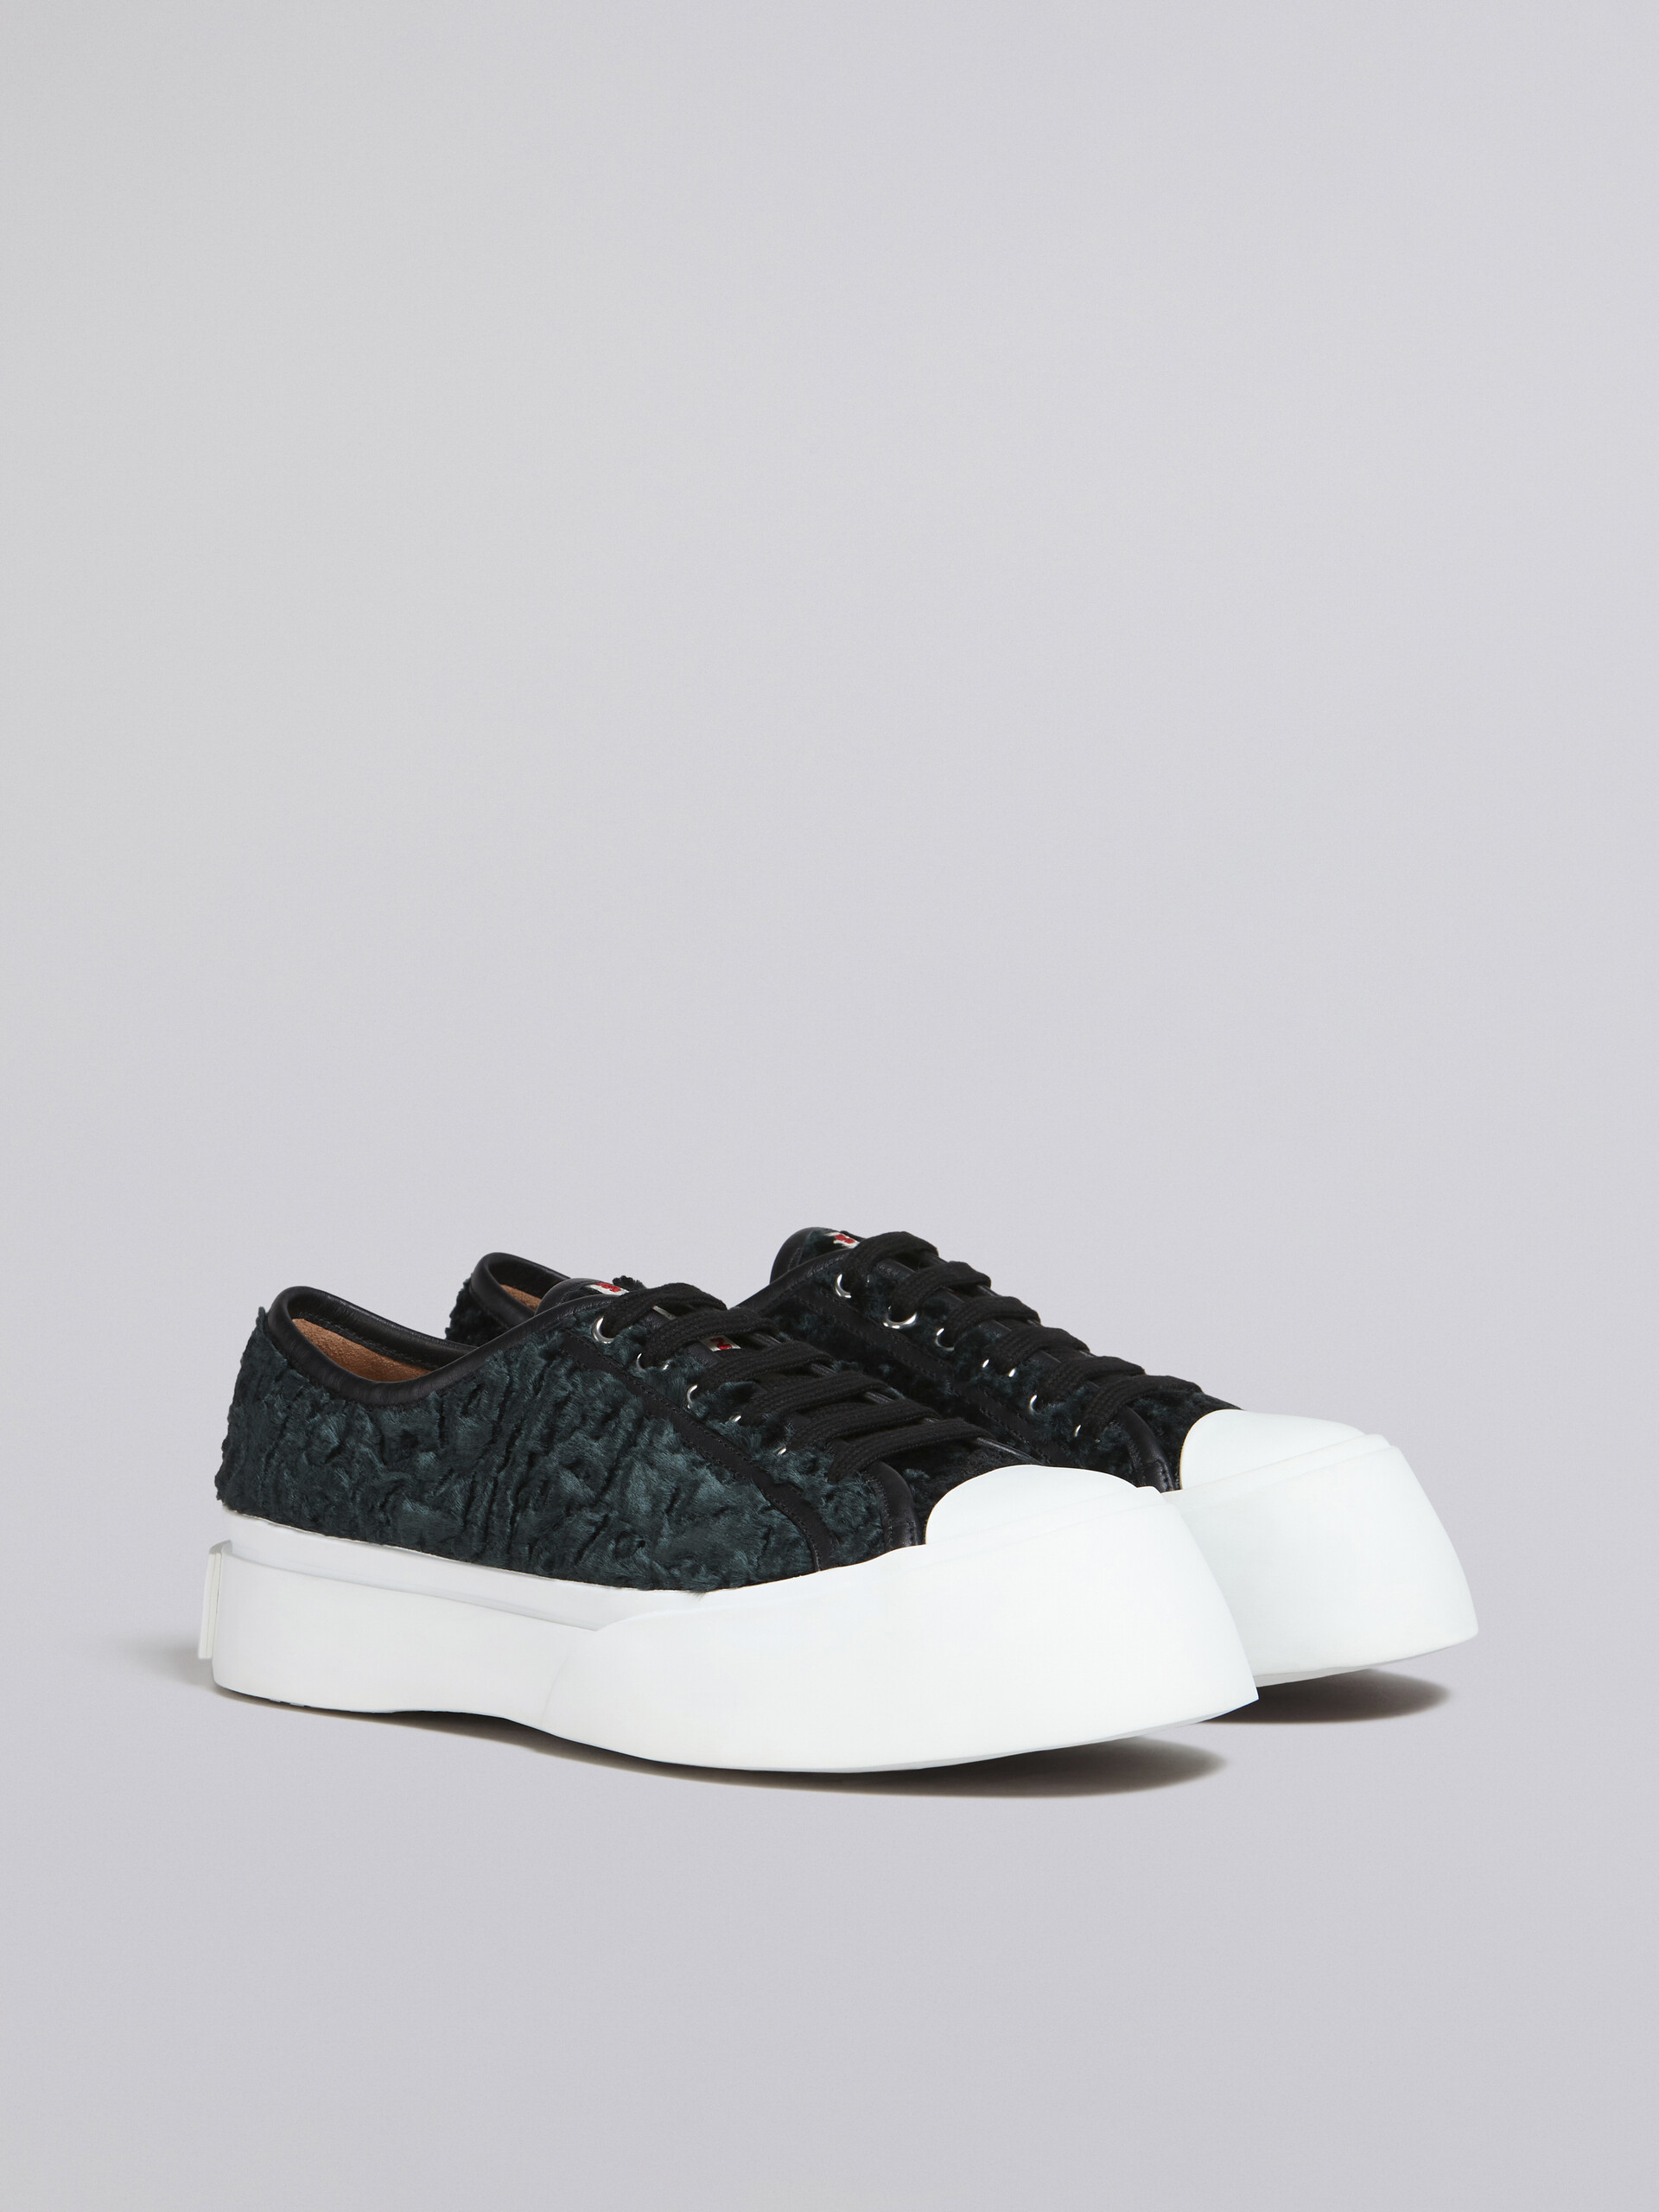 Black curly fabric PABLO lace-up sneaker - Sneakers - Image 2